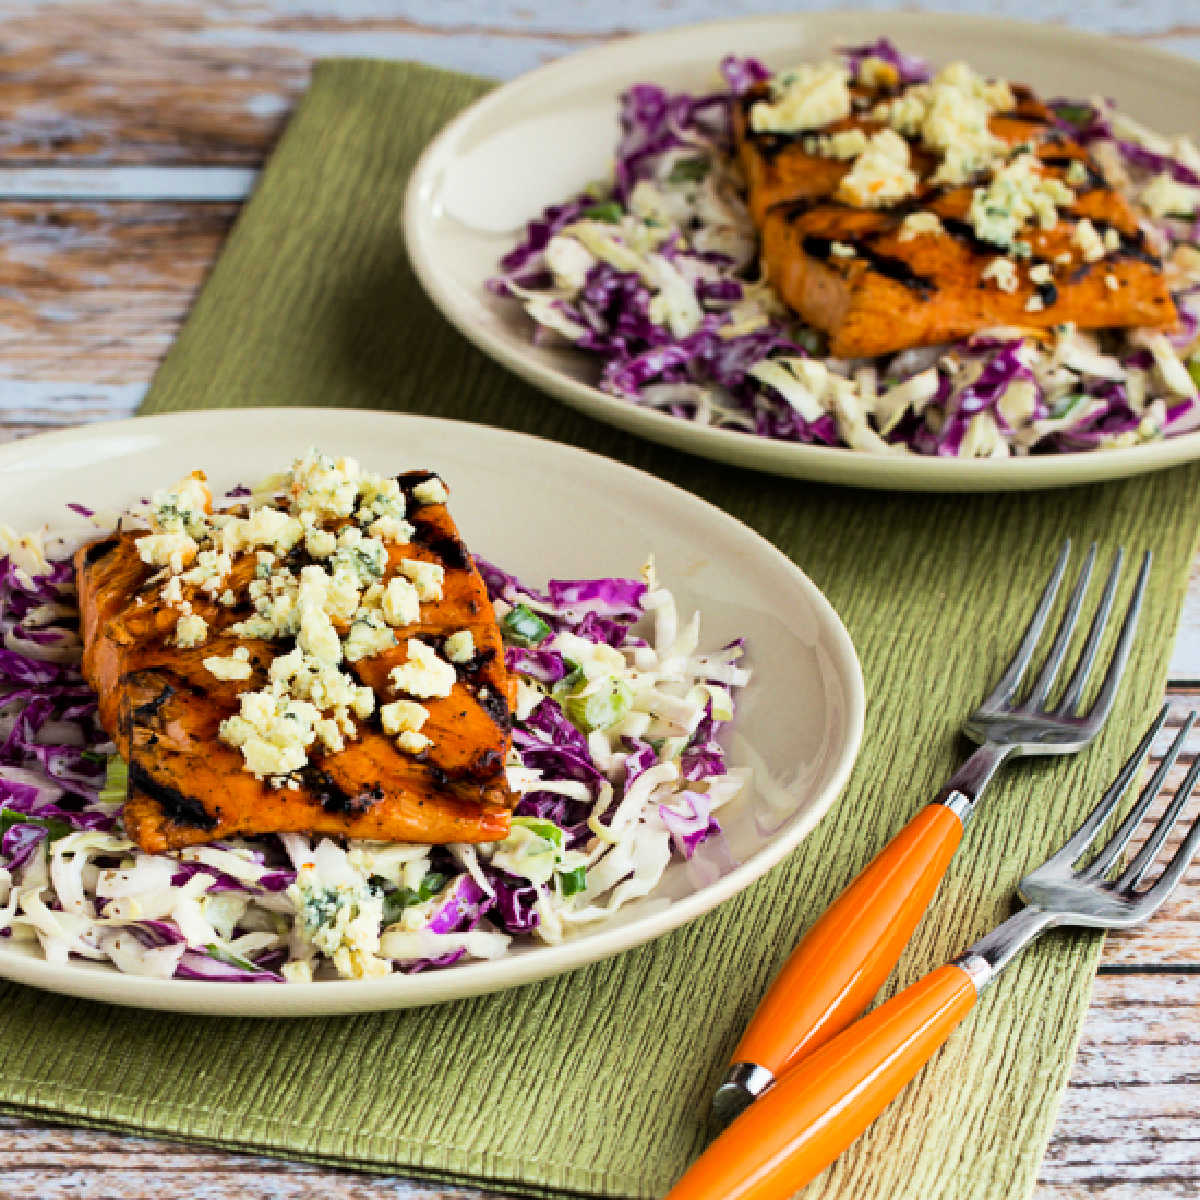 Buffalo Salmon with Blue Cheese Slaw shown on two serving plates.